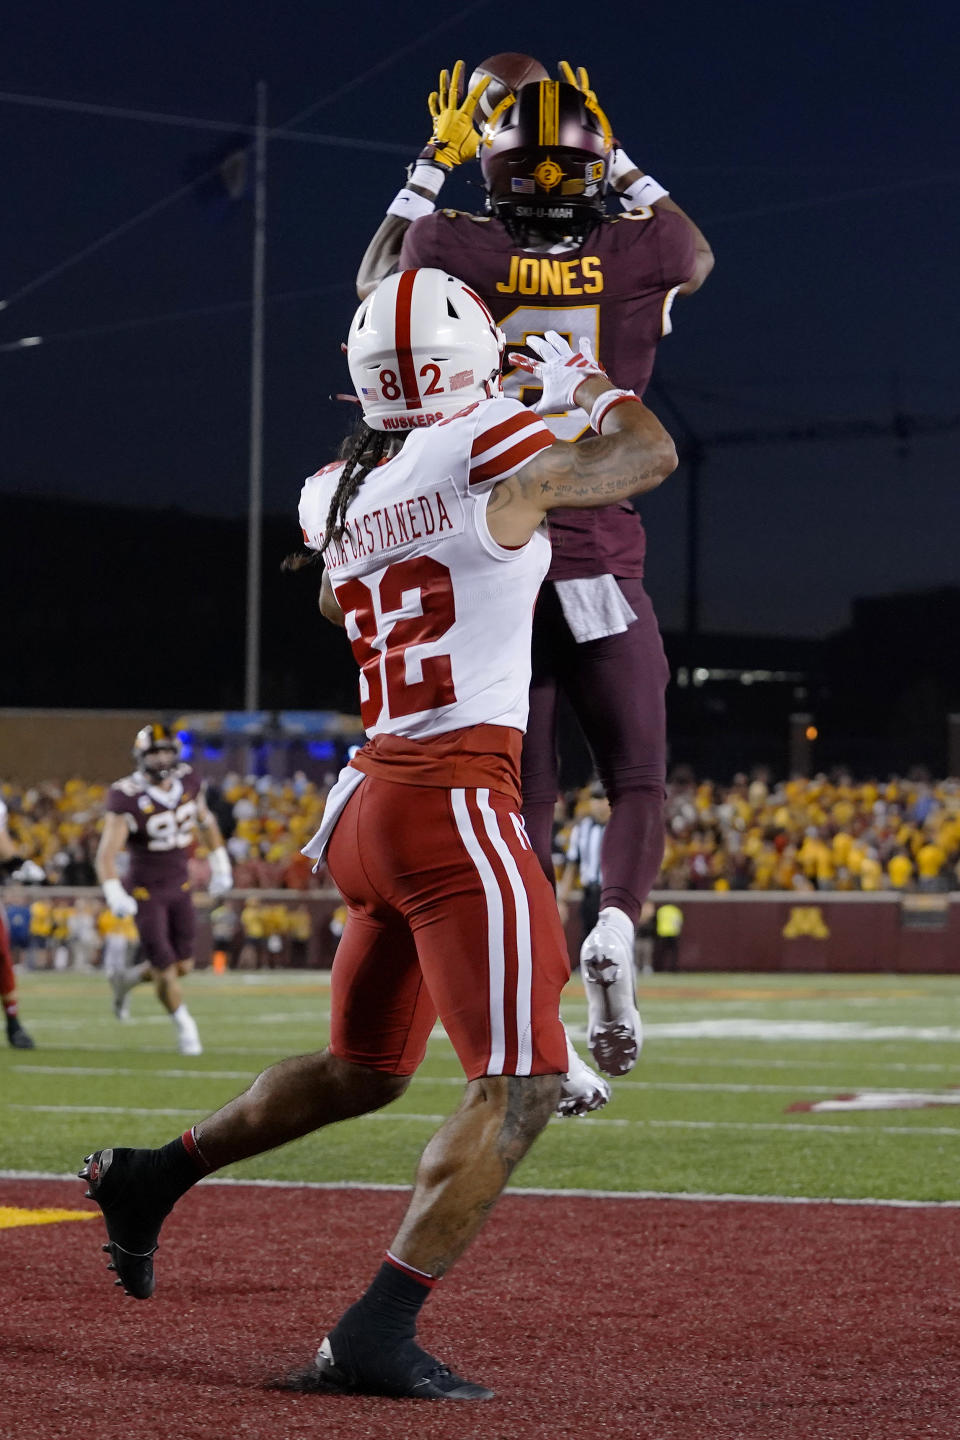 Minnesota defensive back Tre'Von Jones, back, intercepts a pass intended for Nebraska wide receiver Isaiah Garcia-Castaneda at the end of the first half of an NCAA college football game Thursday, Aug. 31, 2023, in Minneapolis. (AP Photo/Abbie Parr)